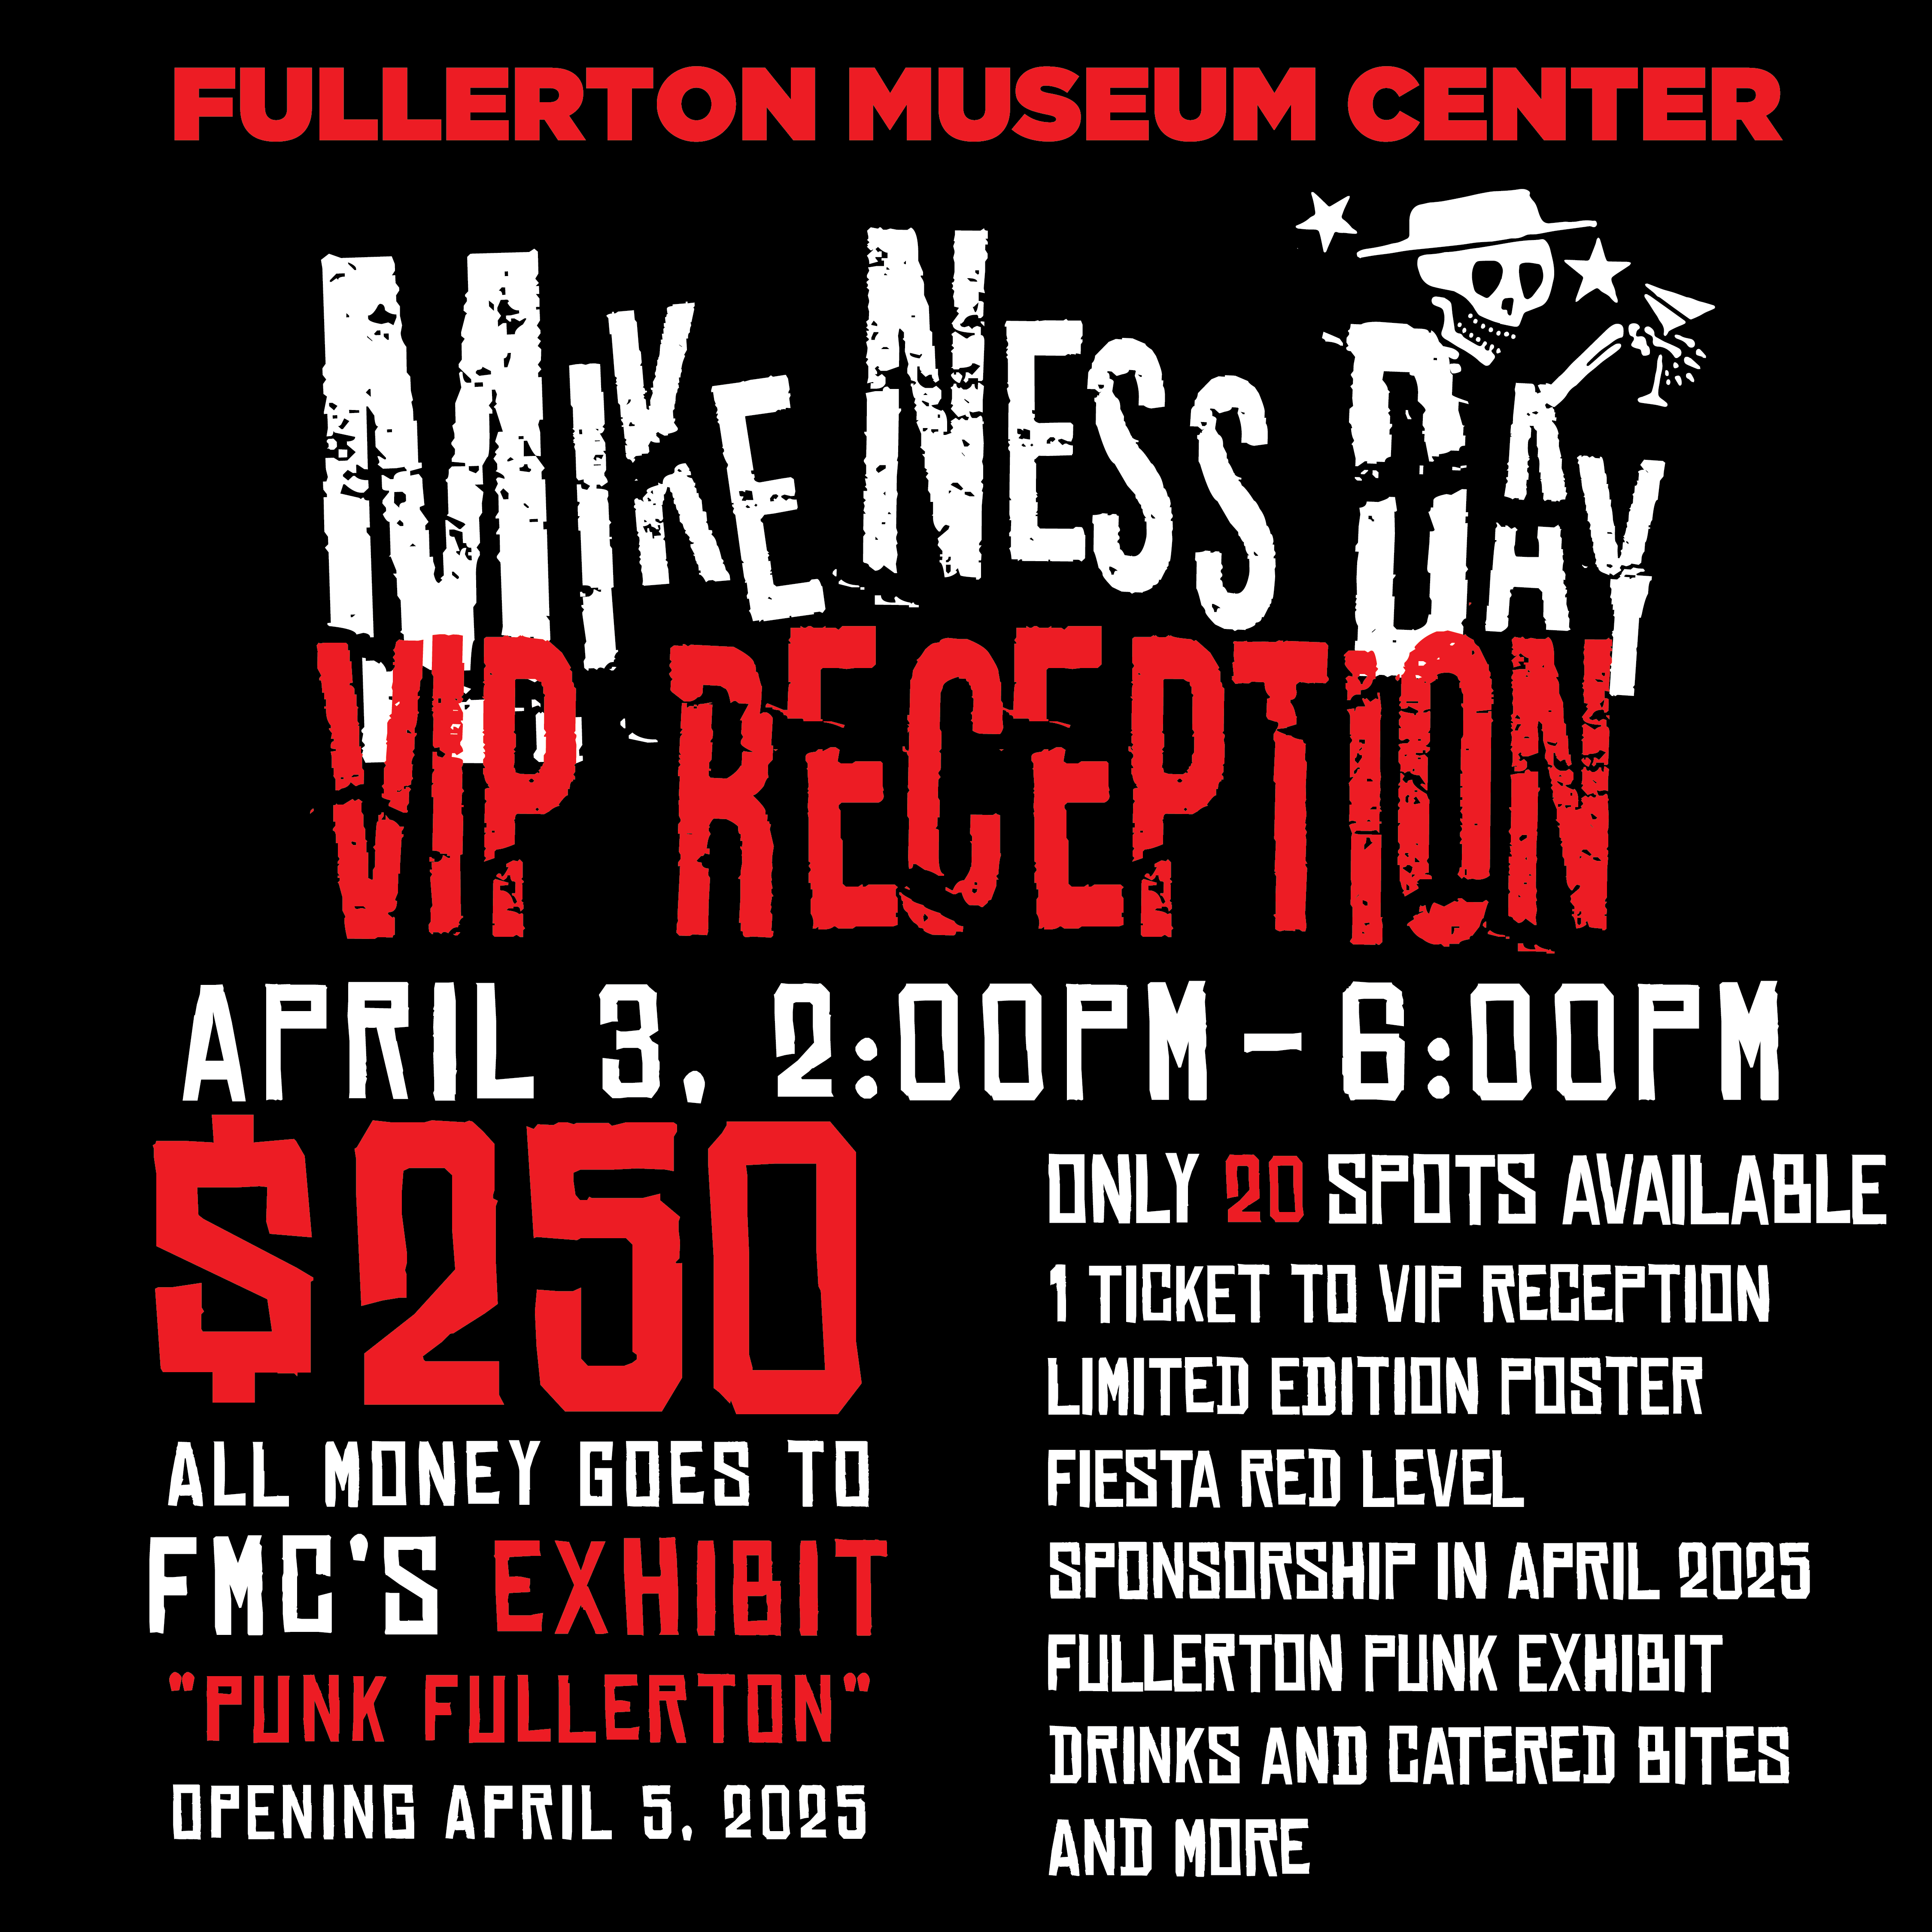 Mike Ness Day VIP Reception